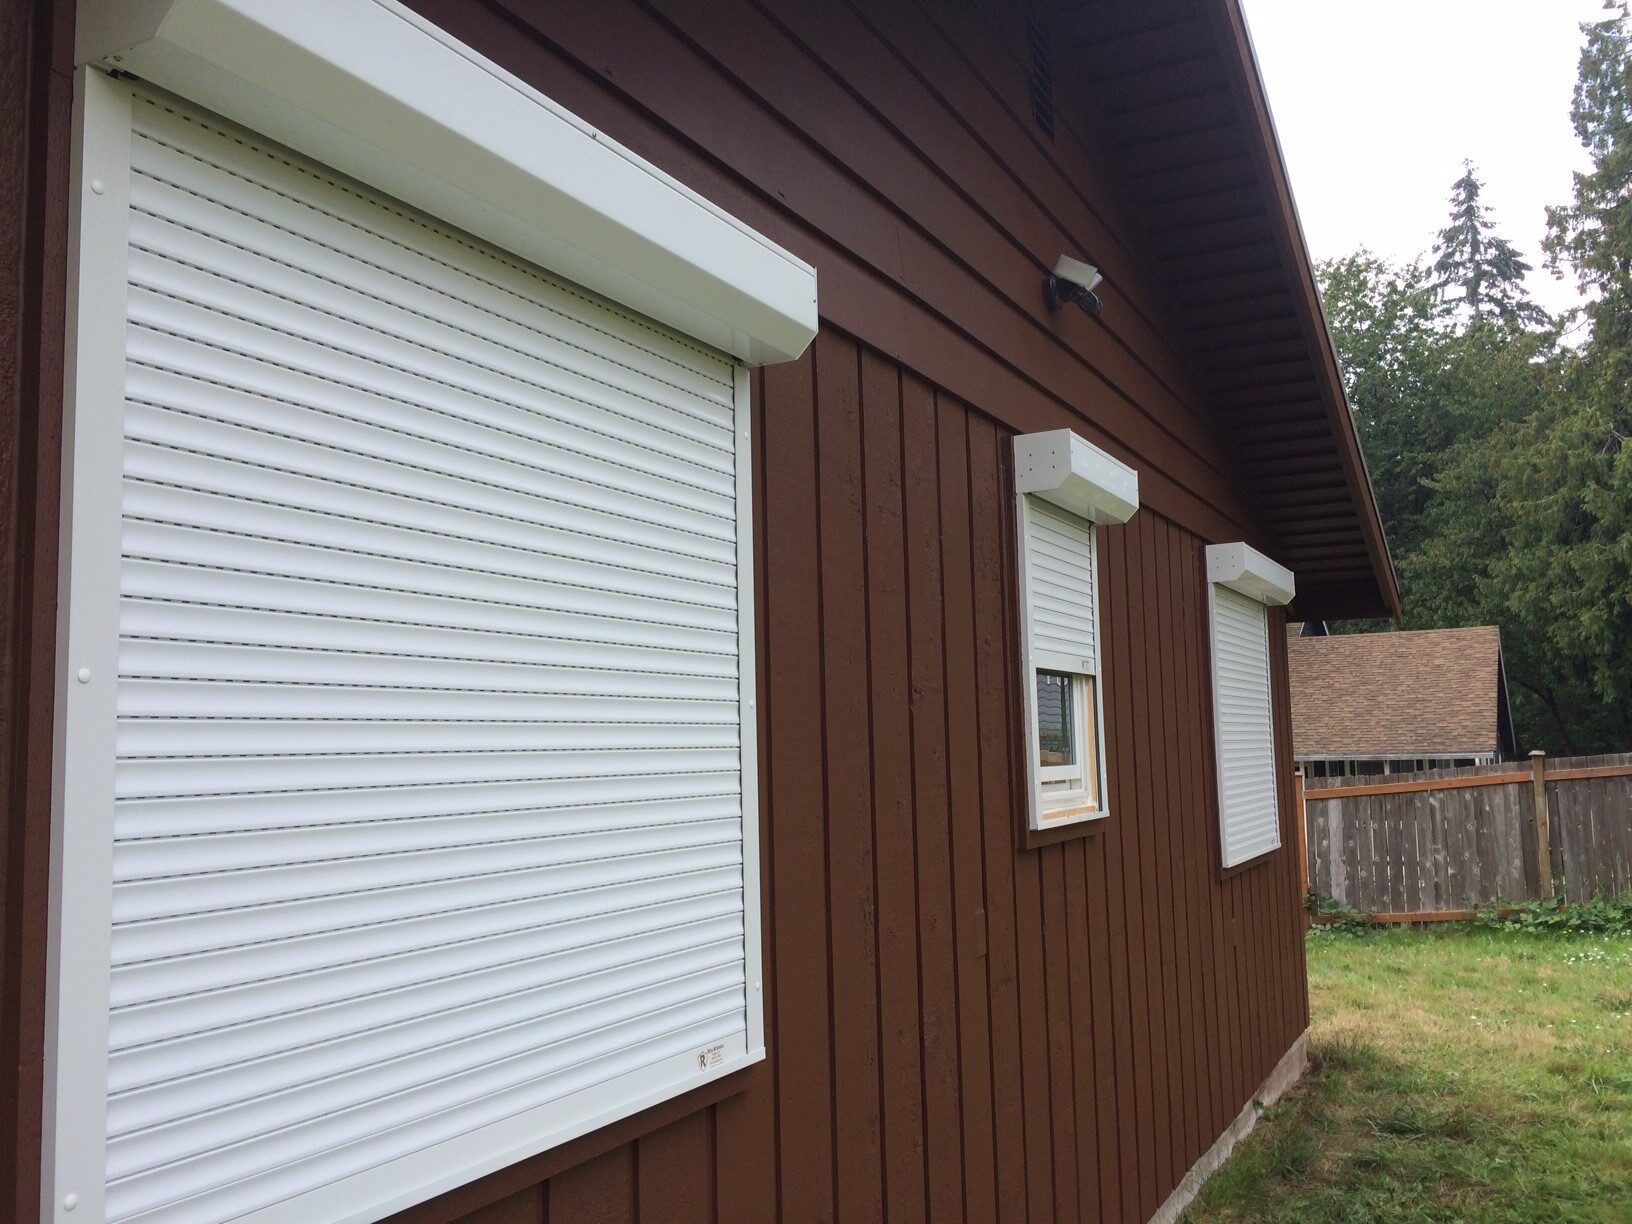 An image showing rolling shutters installed outside of a home's windows